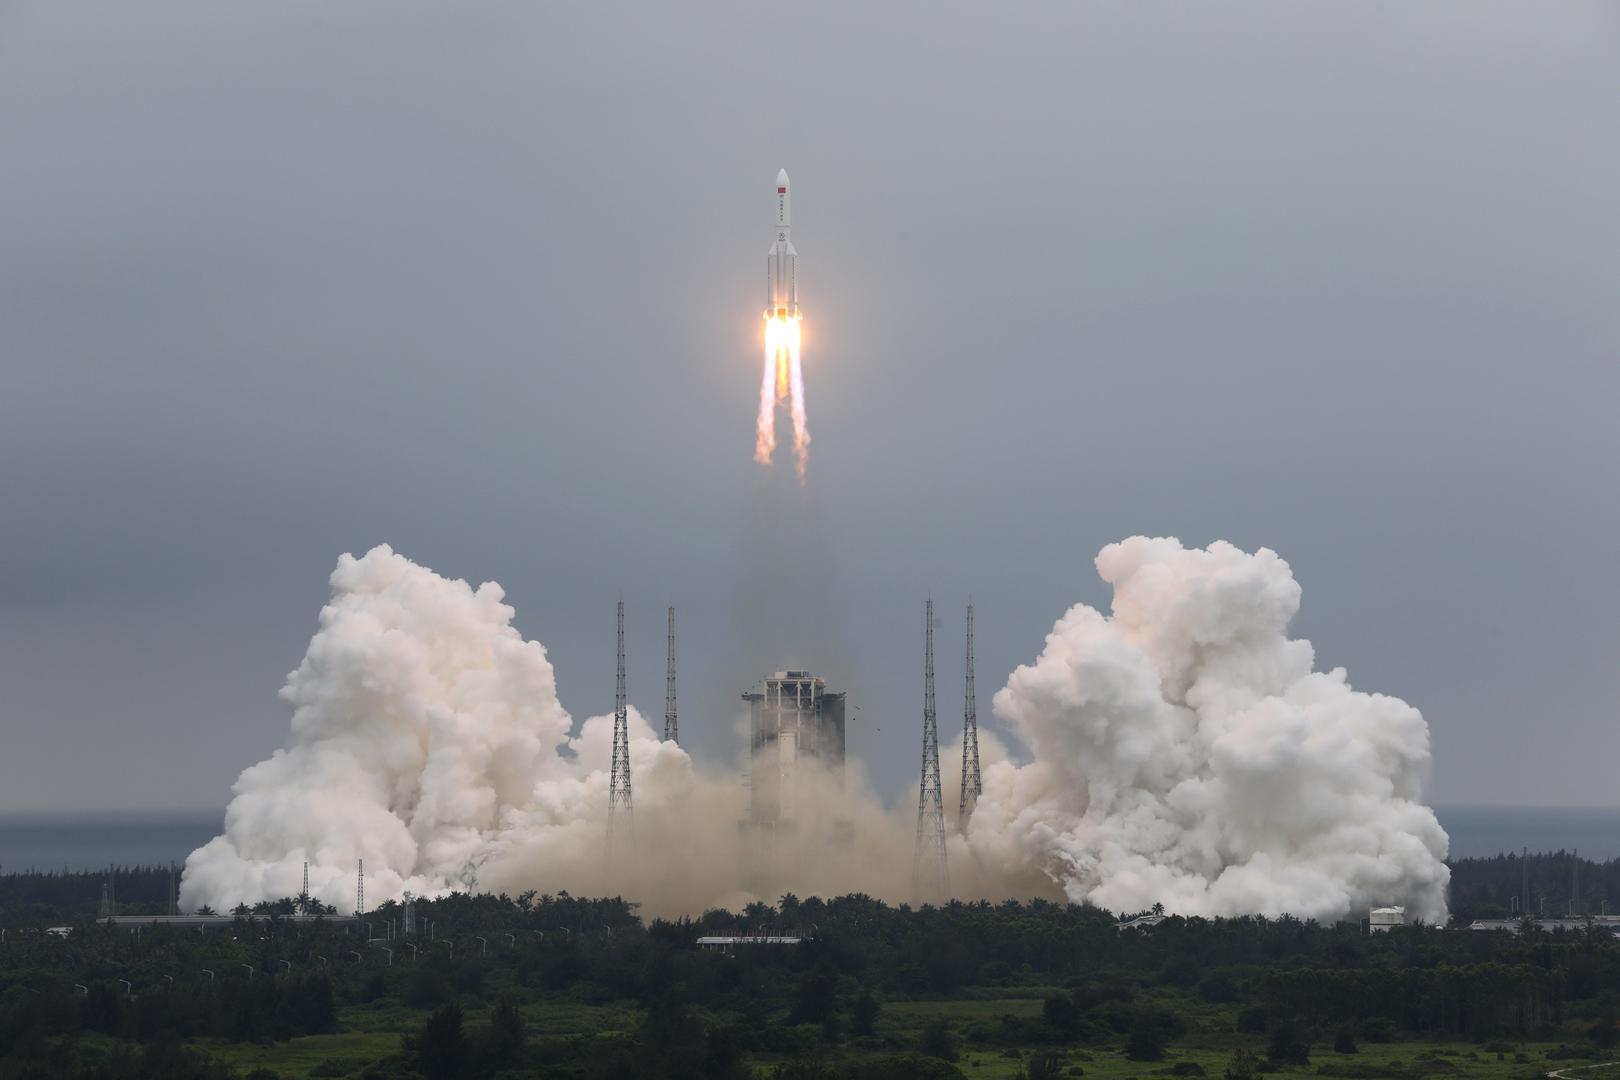 (EyesonSci)CHINA-HAINAN-WENCHANG-SPACE STATION-CORE MODULE-LAUNCH (CN) (210429) -- WENCHANG, April 29, 2021 (Xinhua) -- The Long March-5B Y2 rocket, carrying the Tianhe module, blasts off from the Wenchang Spacecraft Launch Site in south China's Hainan Province, April 29, 2021. China on Thursday sent into space the core module of its space station, kicking off a series of key launch missions that aim to complete the construction of the station by the end of next year. (Xinhua/Ju Zhenhua) Ju Zhenhua  Photo: XINHUA/PIXSELL